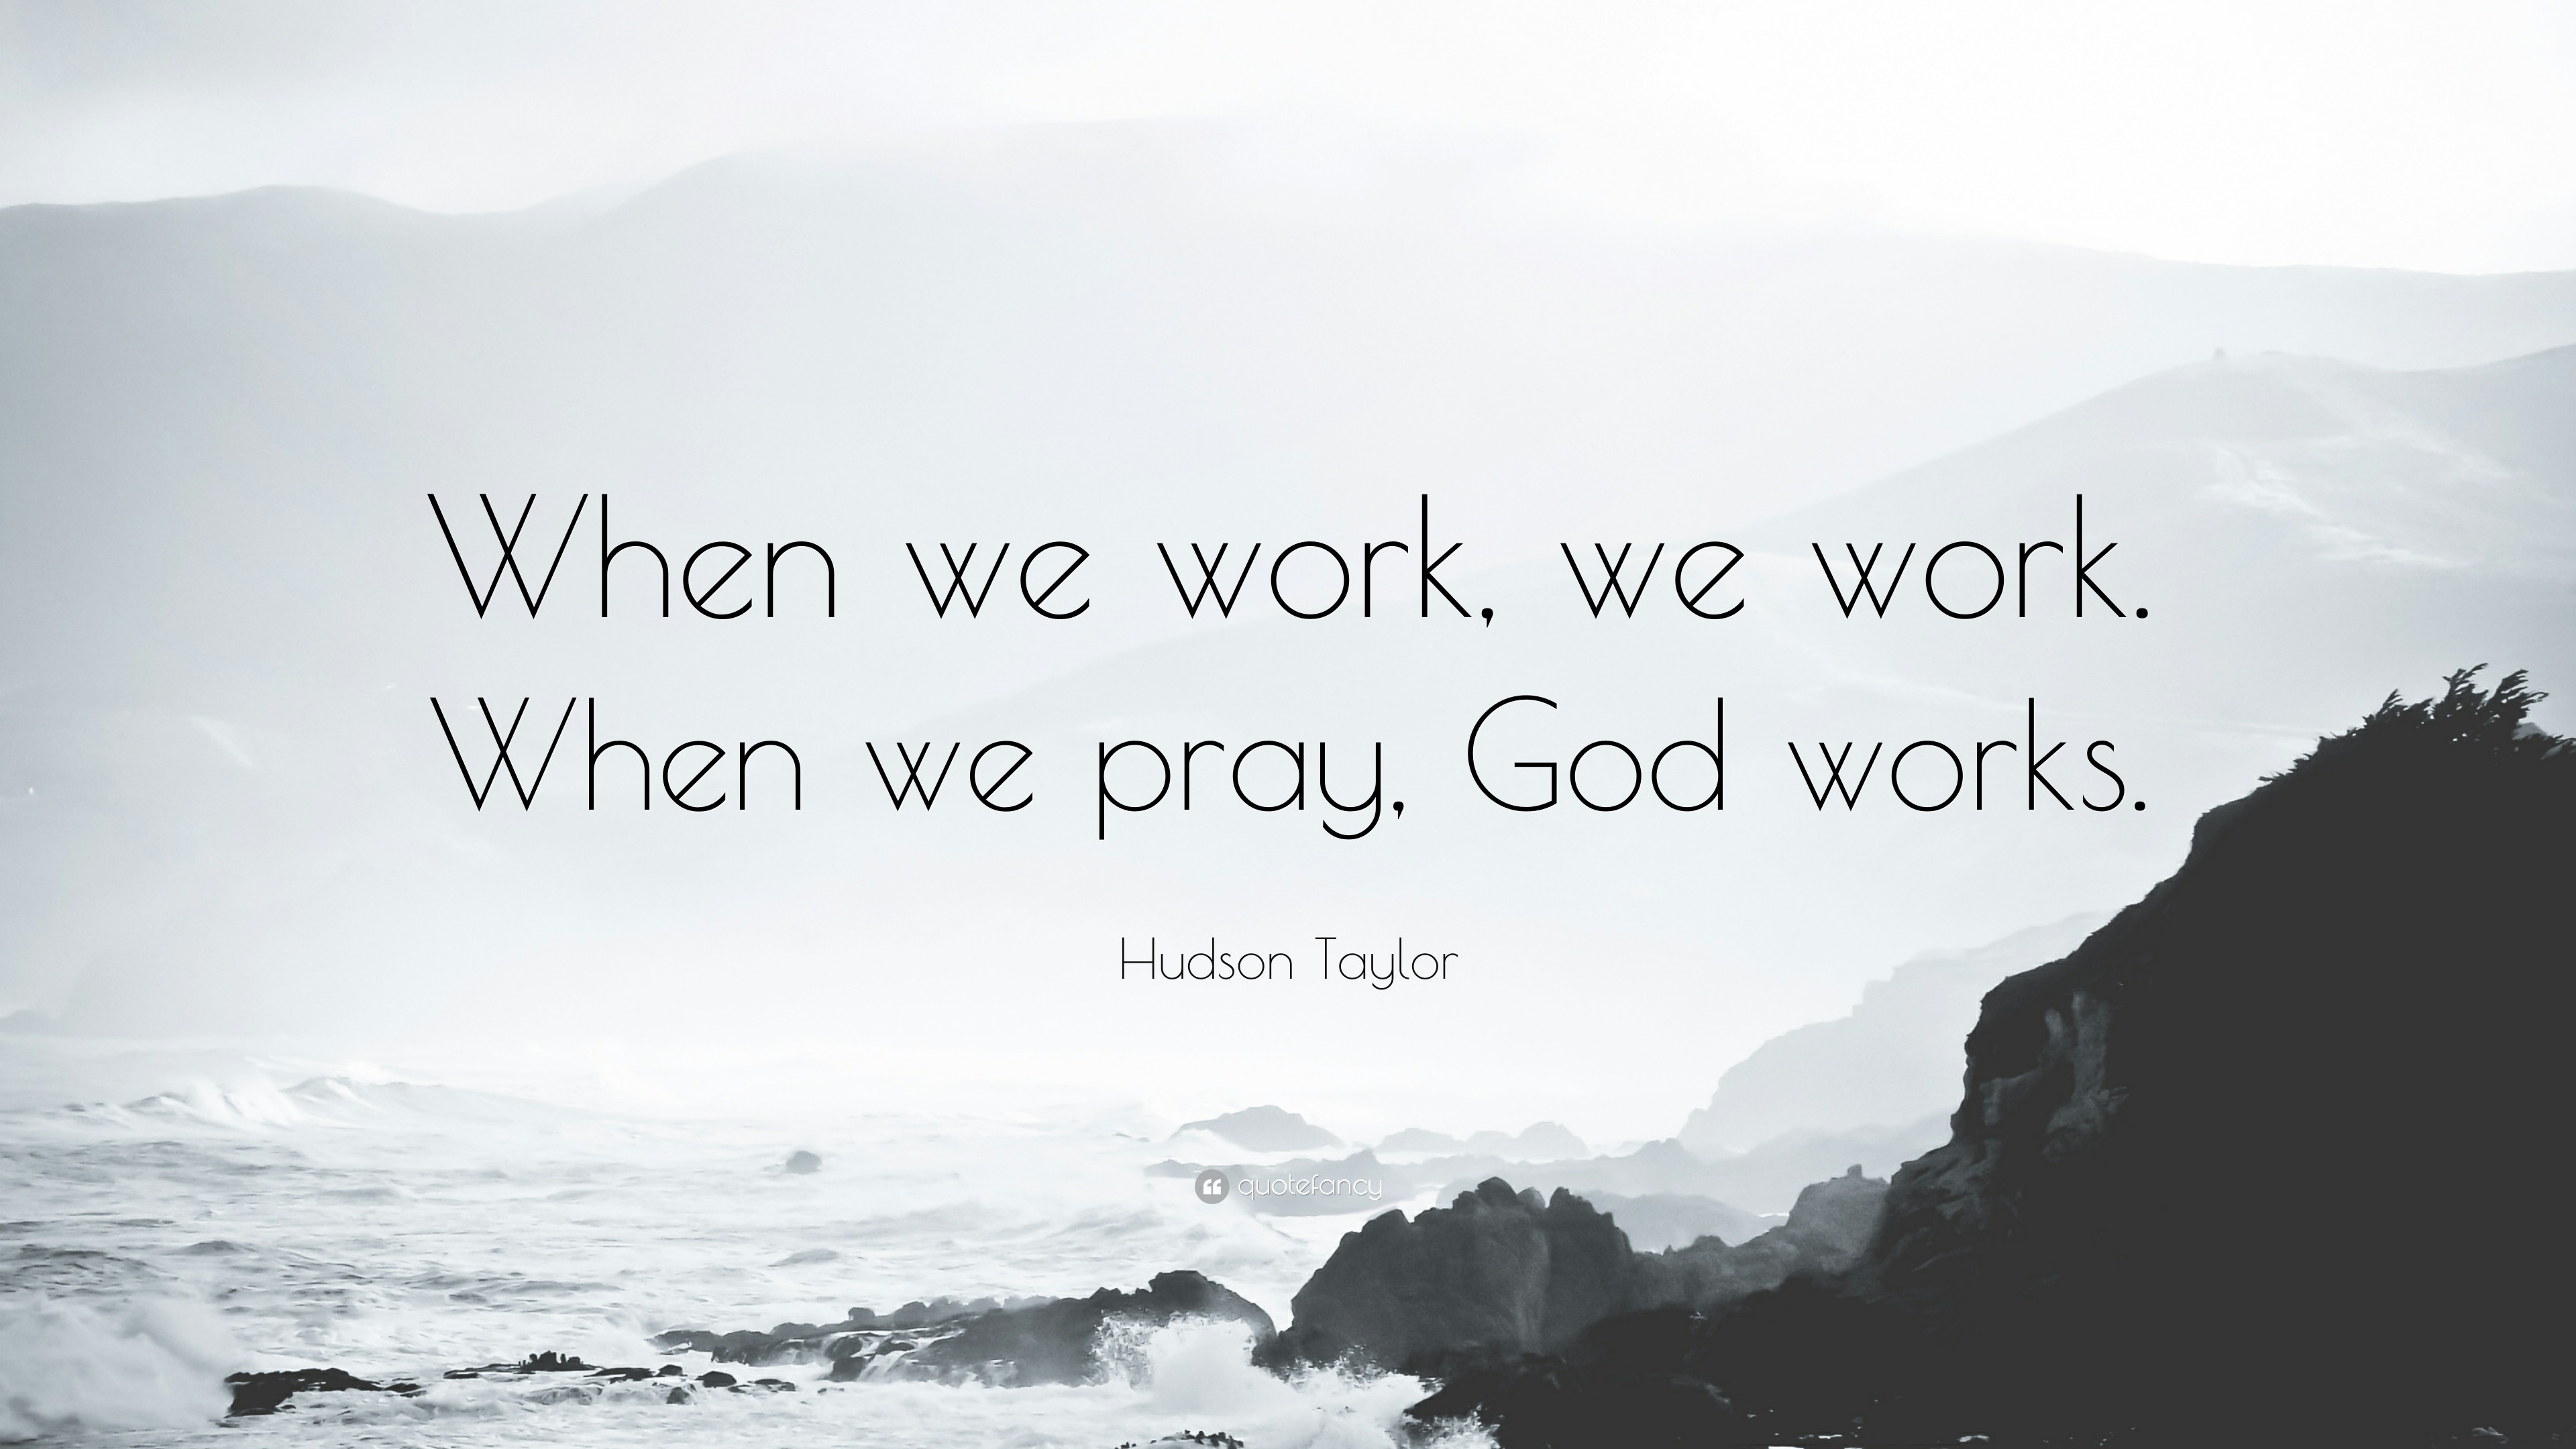 3840x2160 Christian Quotes: “When we work, we work. When we pray, God